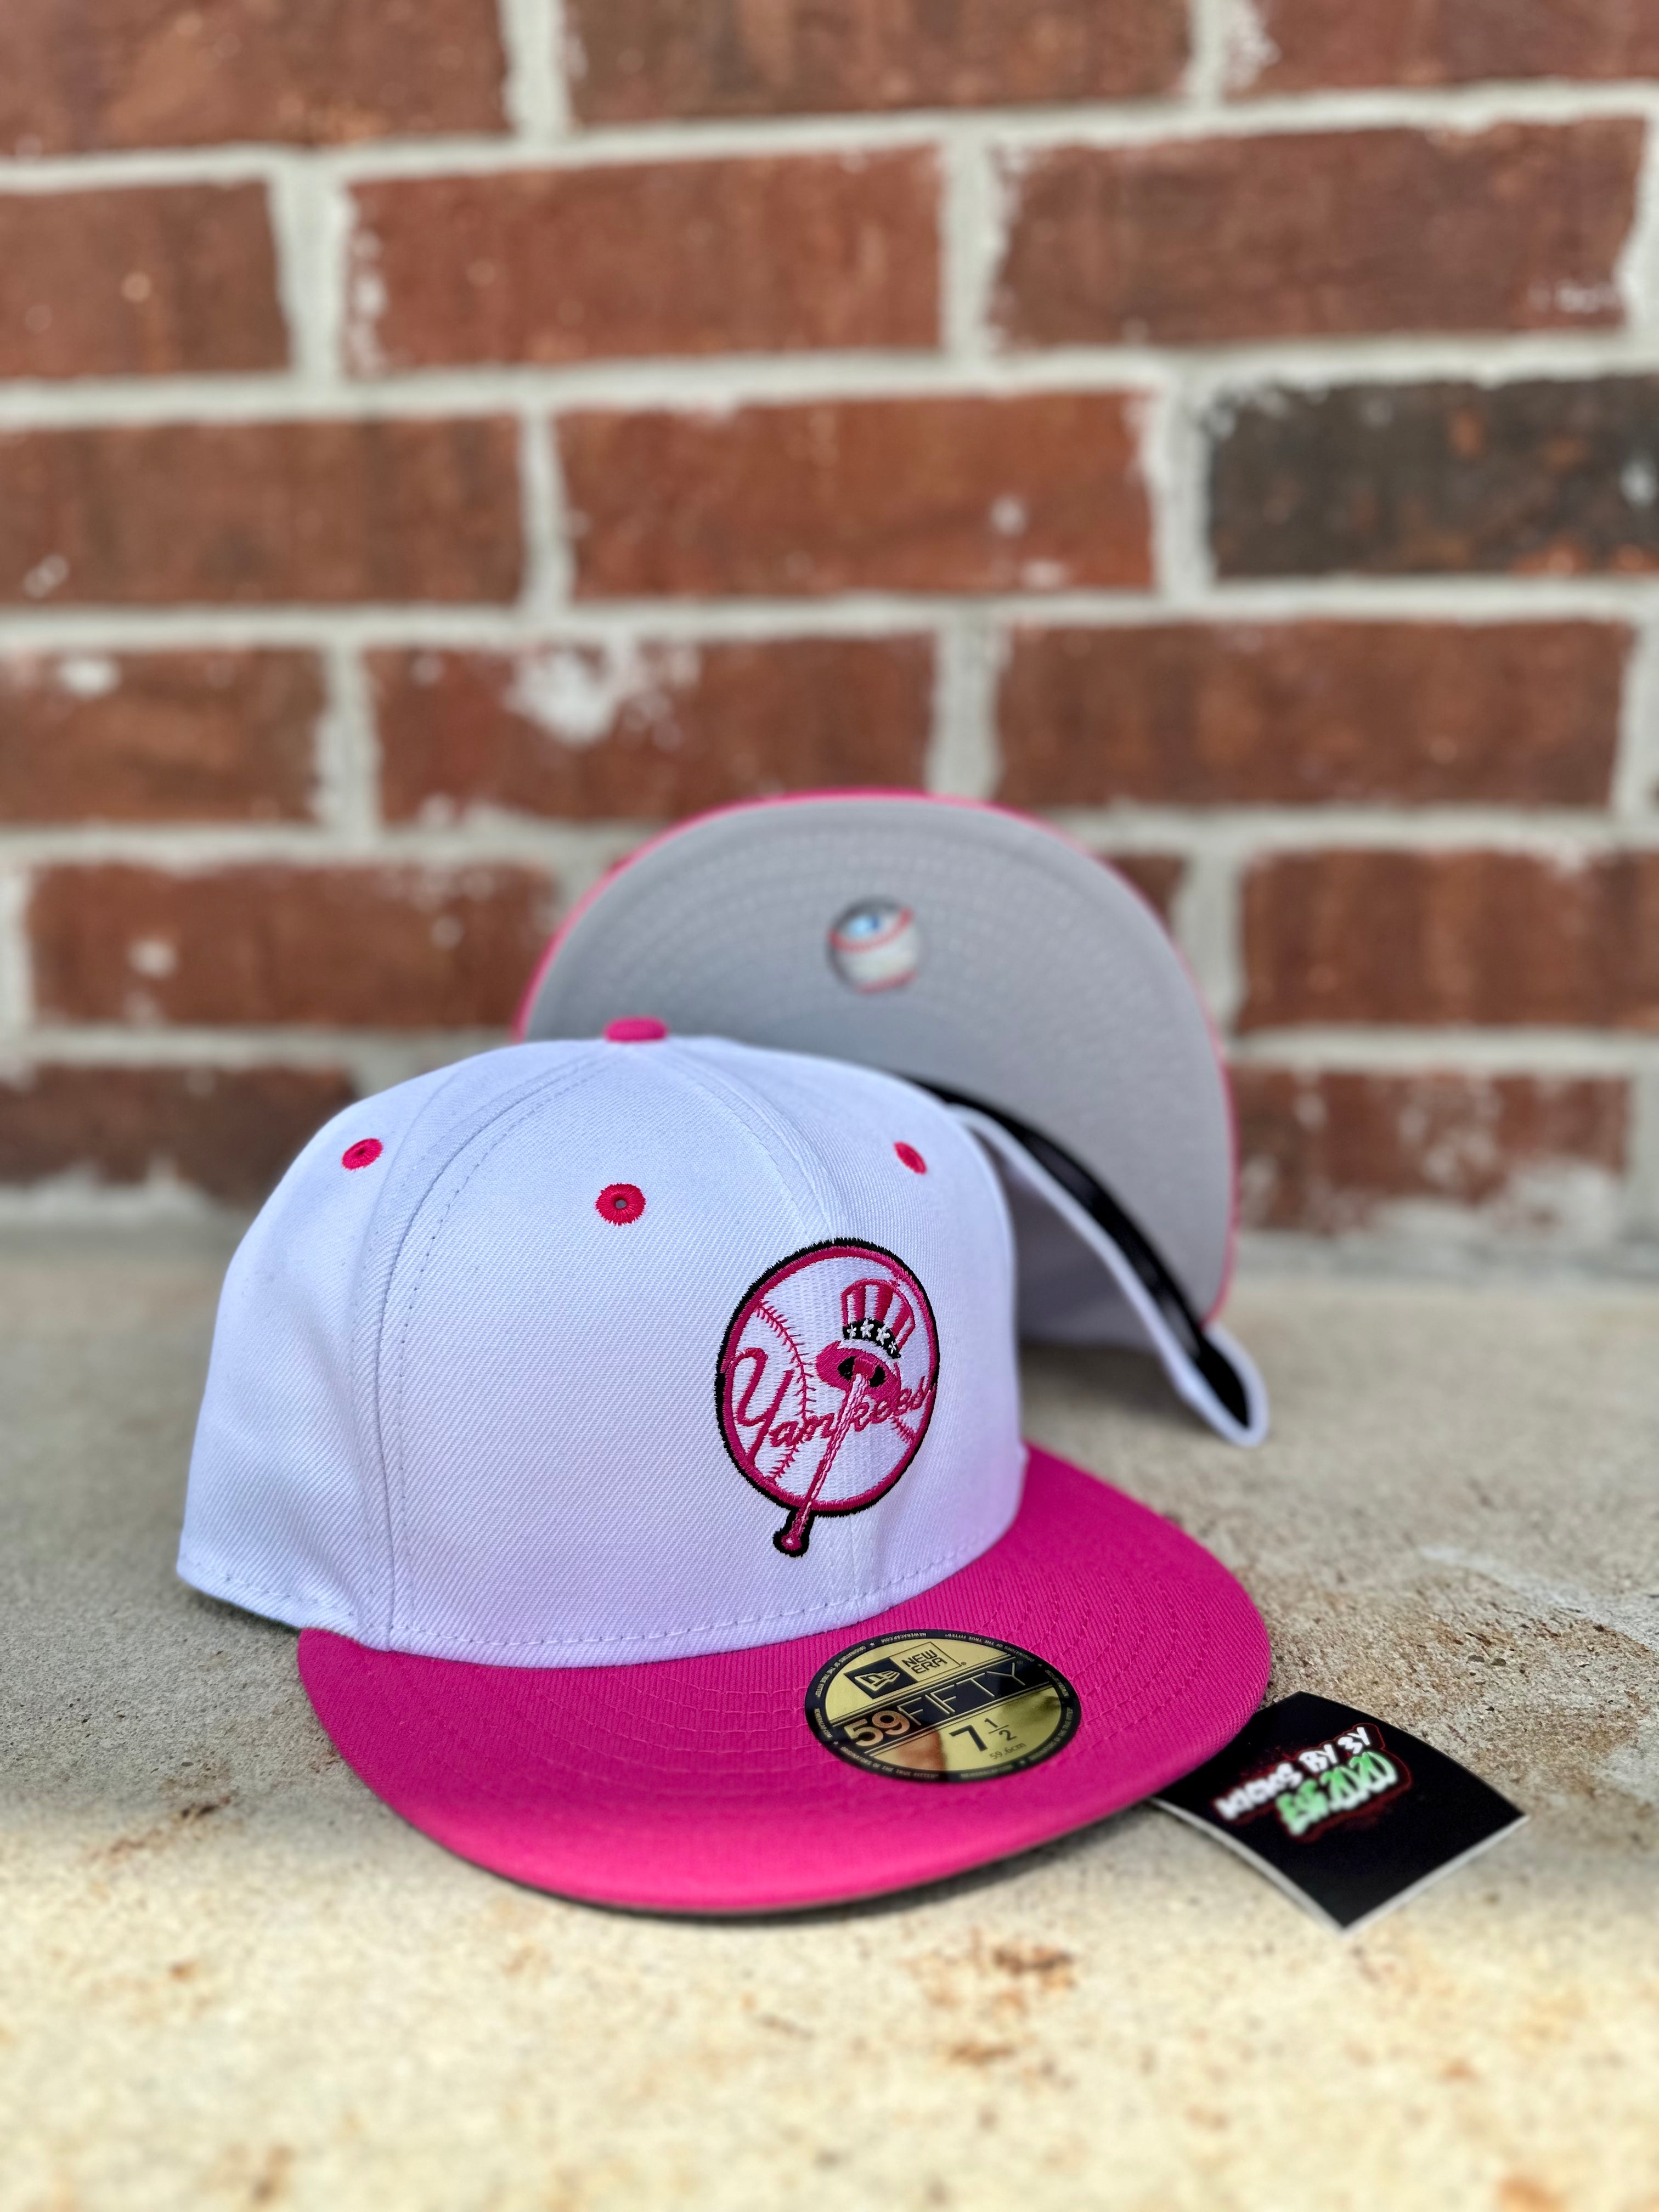 New Era 59 FIFTY Fitted "New York Yankees" Alternate Pink Logo